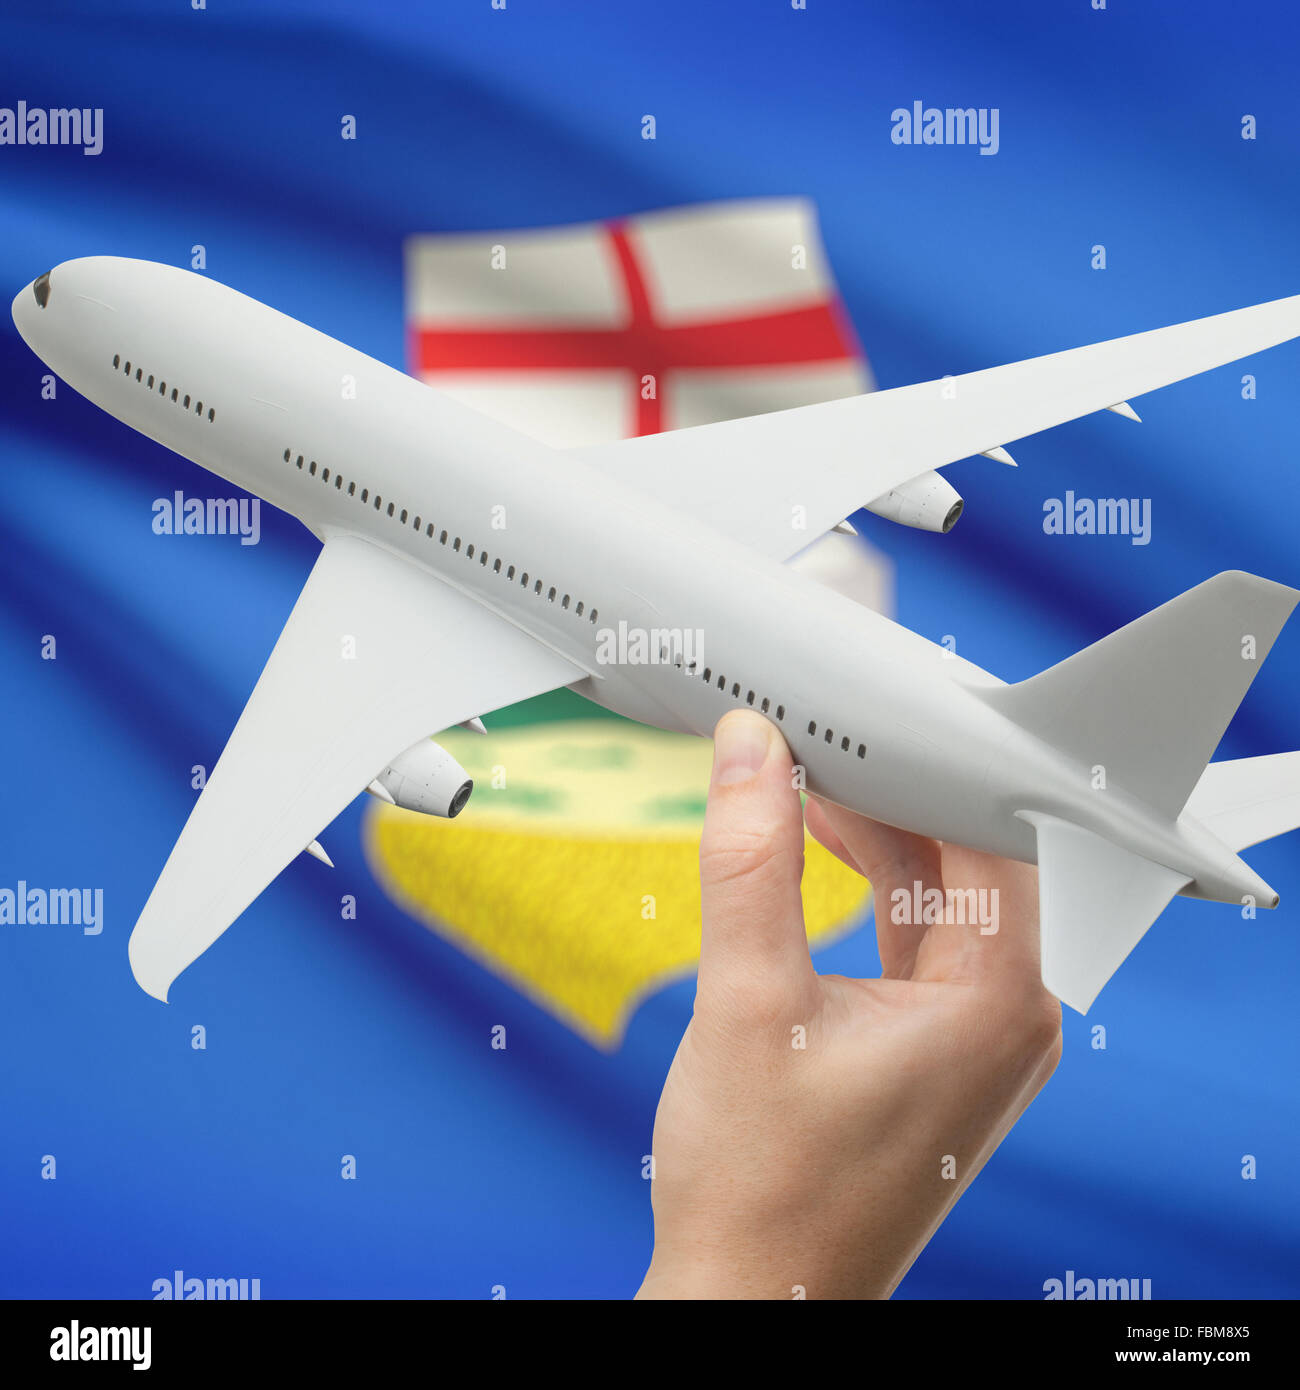 Airplane in hand with Canadian province or territory flag on background series - Alberta Stock Photo